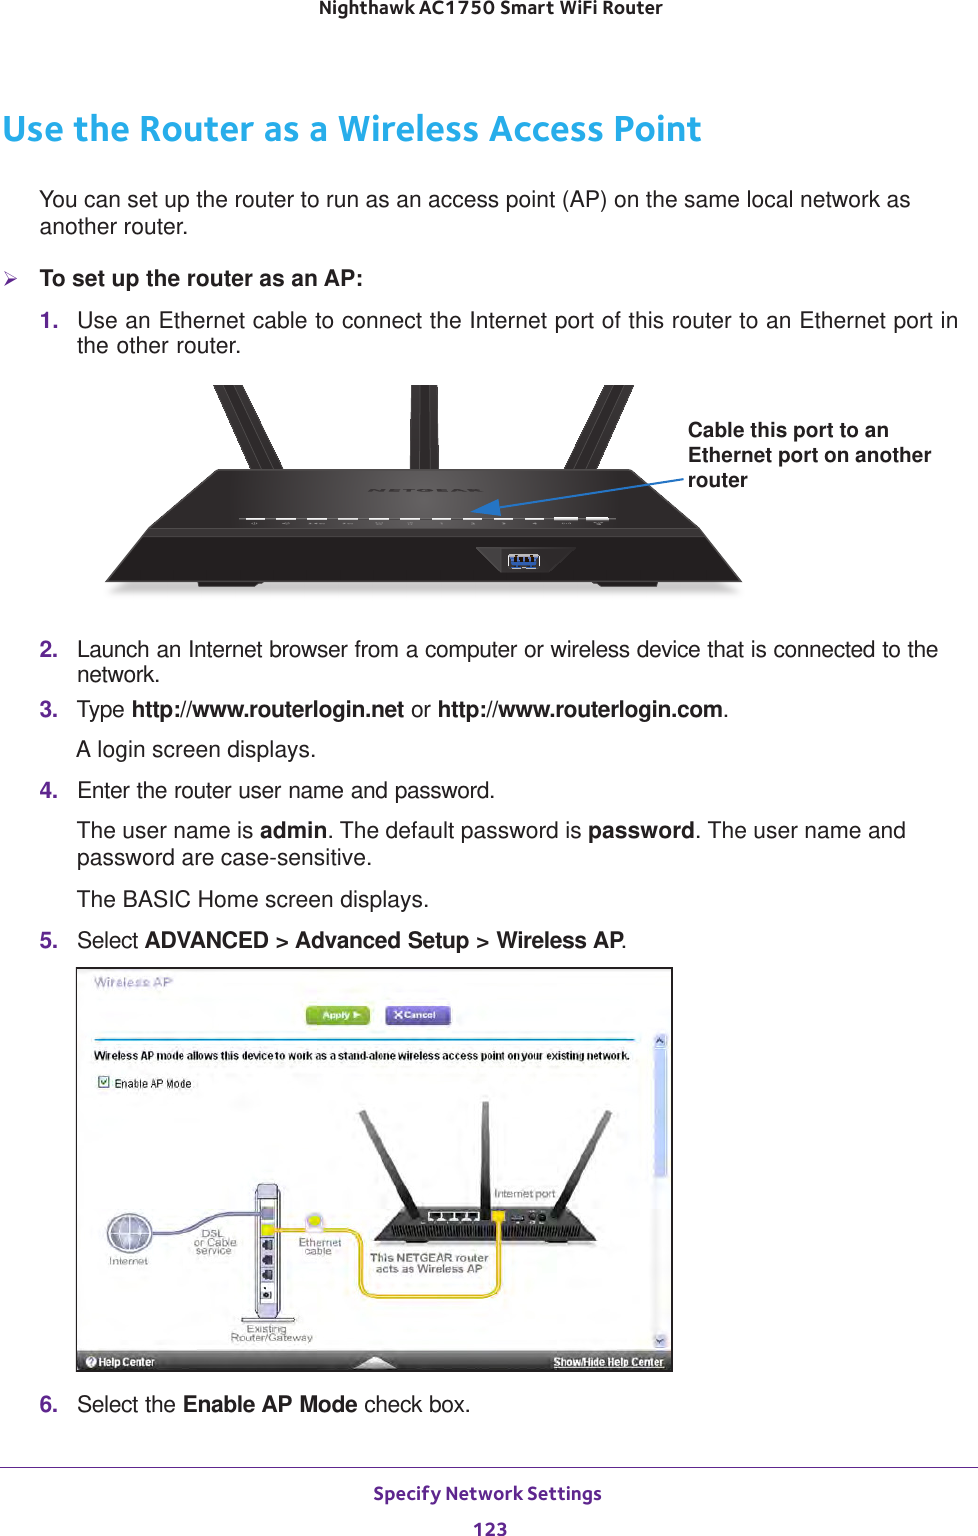 Specify Network Settings 123 Nighthawk AC1750 Smart WiFi RouterUse the Router as a Wireless Access PointYou can set up the router to run as an access point (AP) on the same local network as another router.To set up the router as an AP:1.  Use an Ethernet cable to connect the Internet port of this router to an Ethernet port in the other router. Cable this port to an Ethernet port on another router2.  Launch an Internet browser from a computer or wireless device that is connected to the network.3.  Type http://www.routerlogin.net or http://www.routerlogin.com.A login screen displays.4.  Enter the router user name and password.The user name is admin. The default password is password. The user name and password are case-sensitive.The BASIC Home screen displays.5.  Select ADVANCED &gt; Advanced Setup &gt; Wireless AP.6.  Select the Enable AP Mode check box.